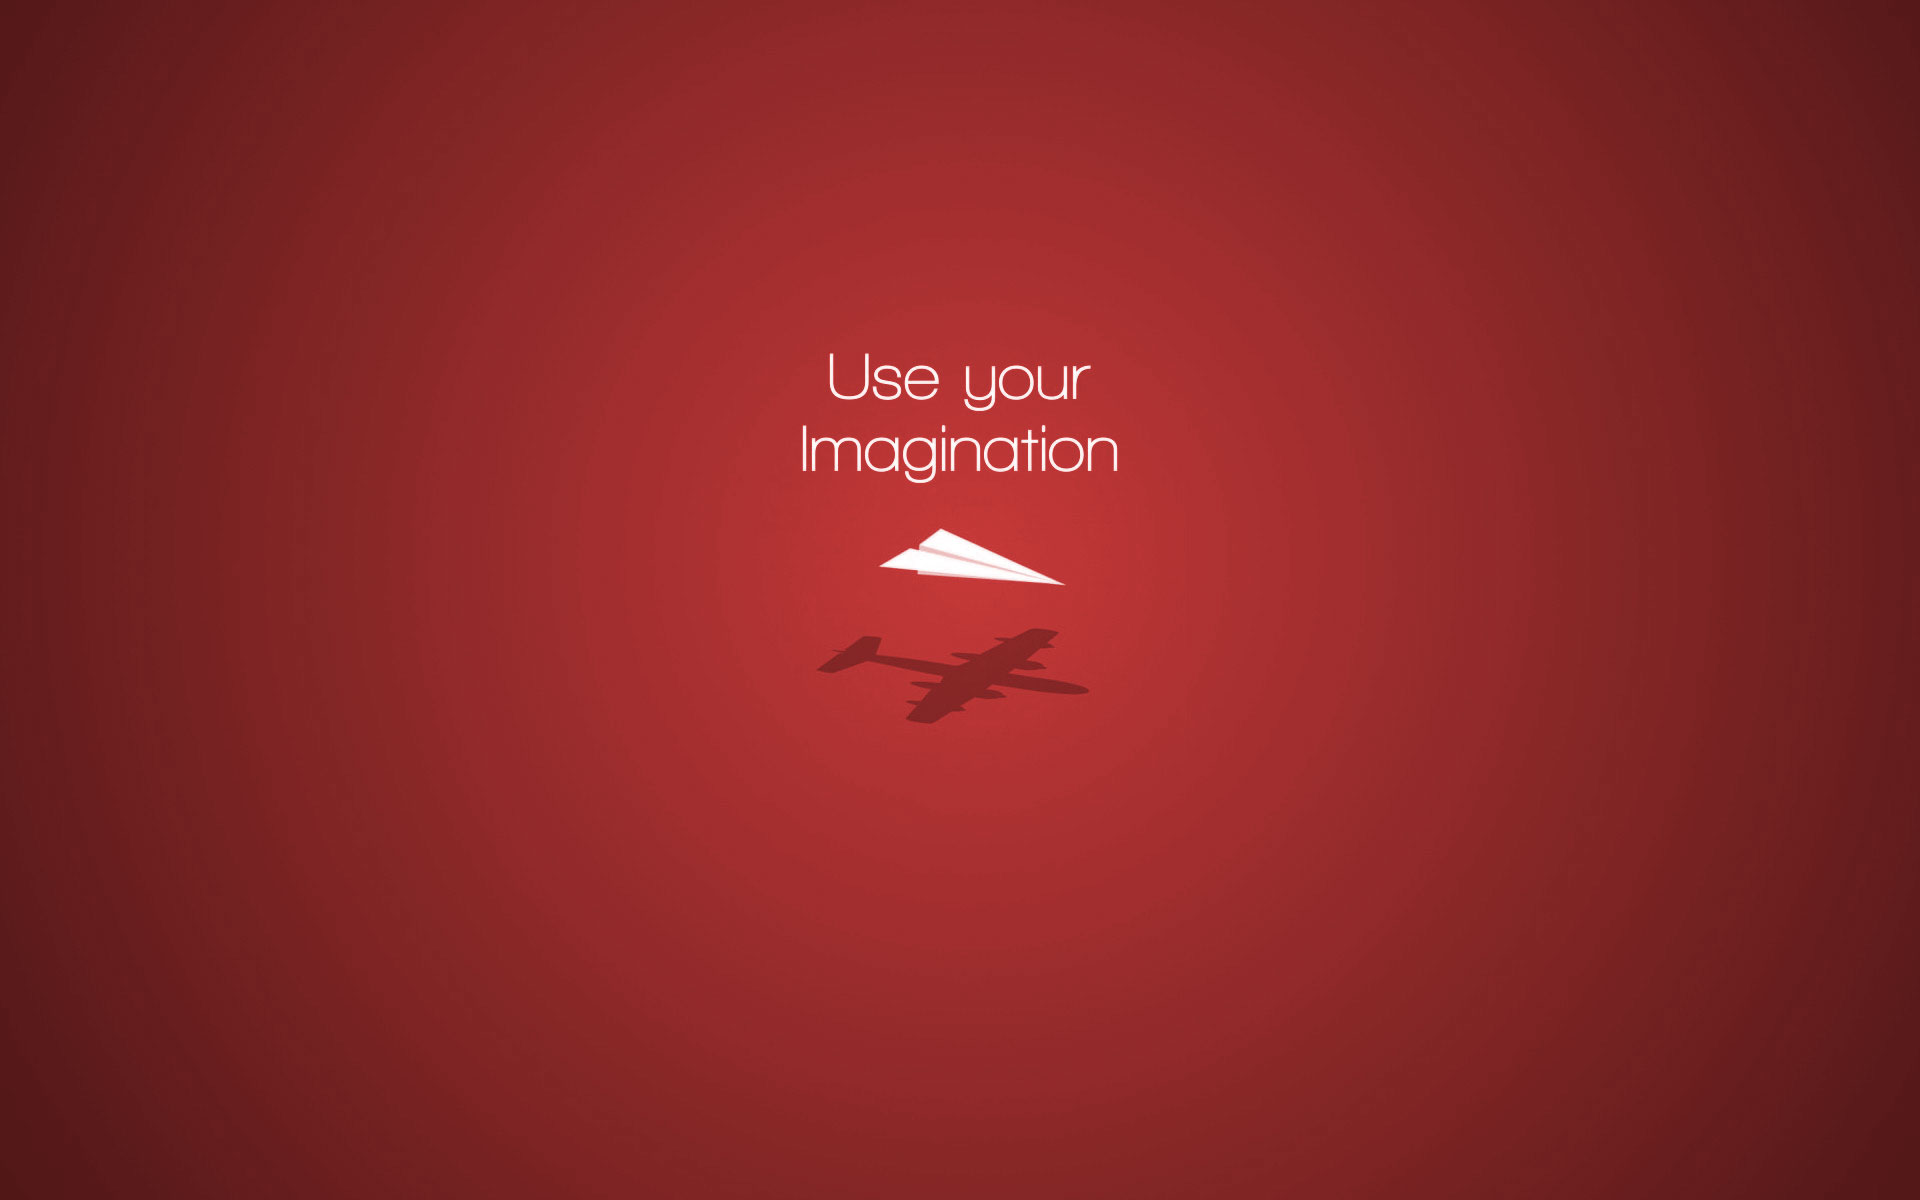 inspirational wallpapers,red,logo,text,font,maroon